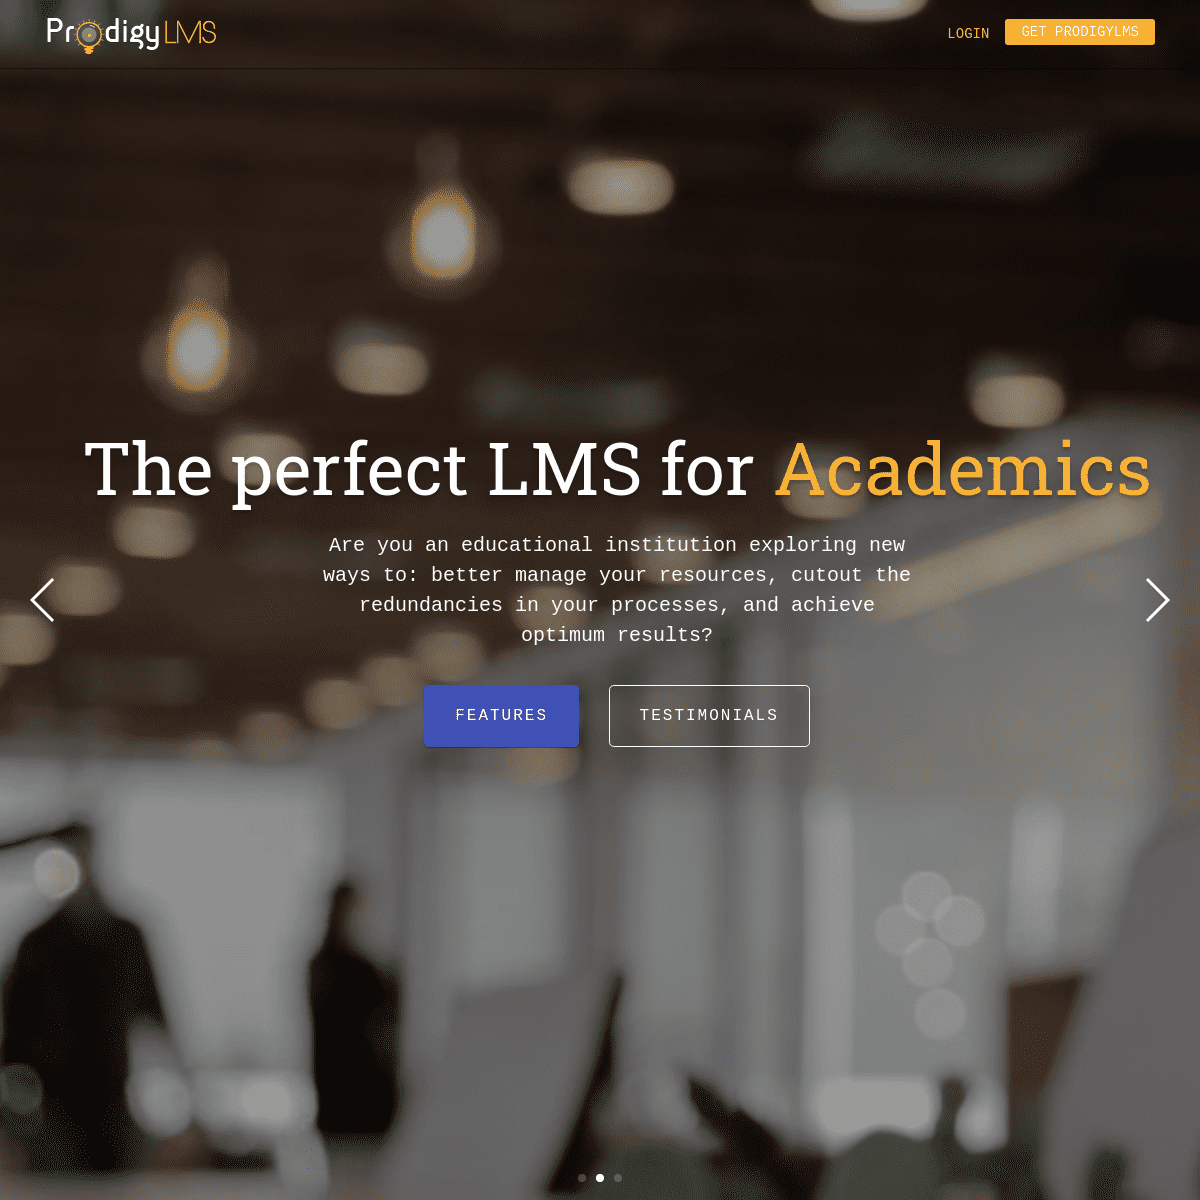 A complete backup of prodigylms.com